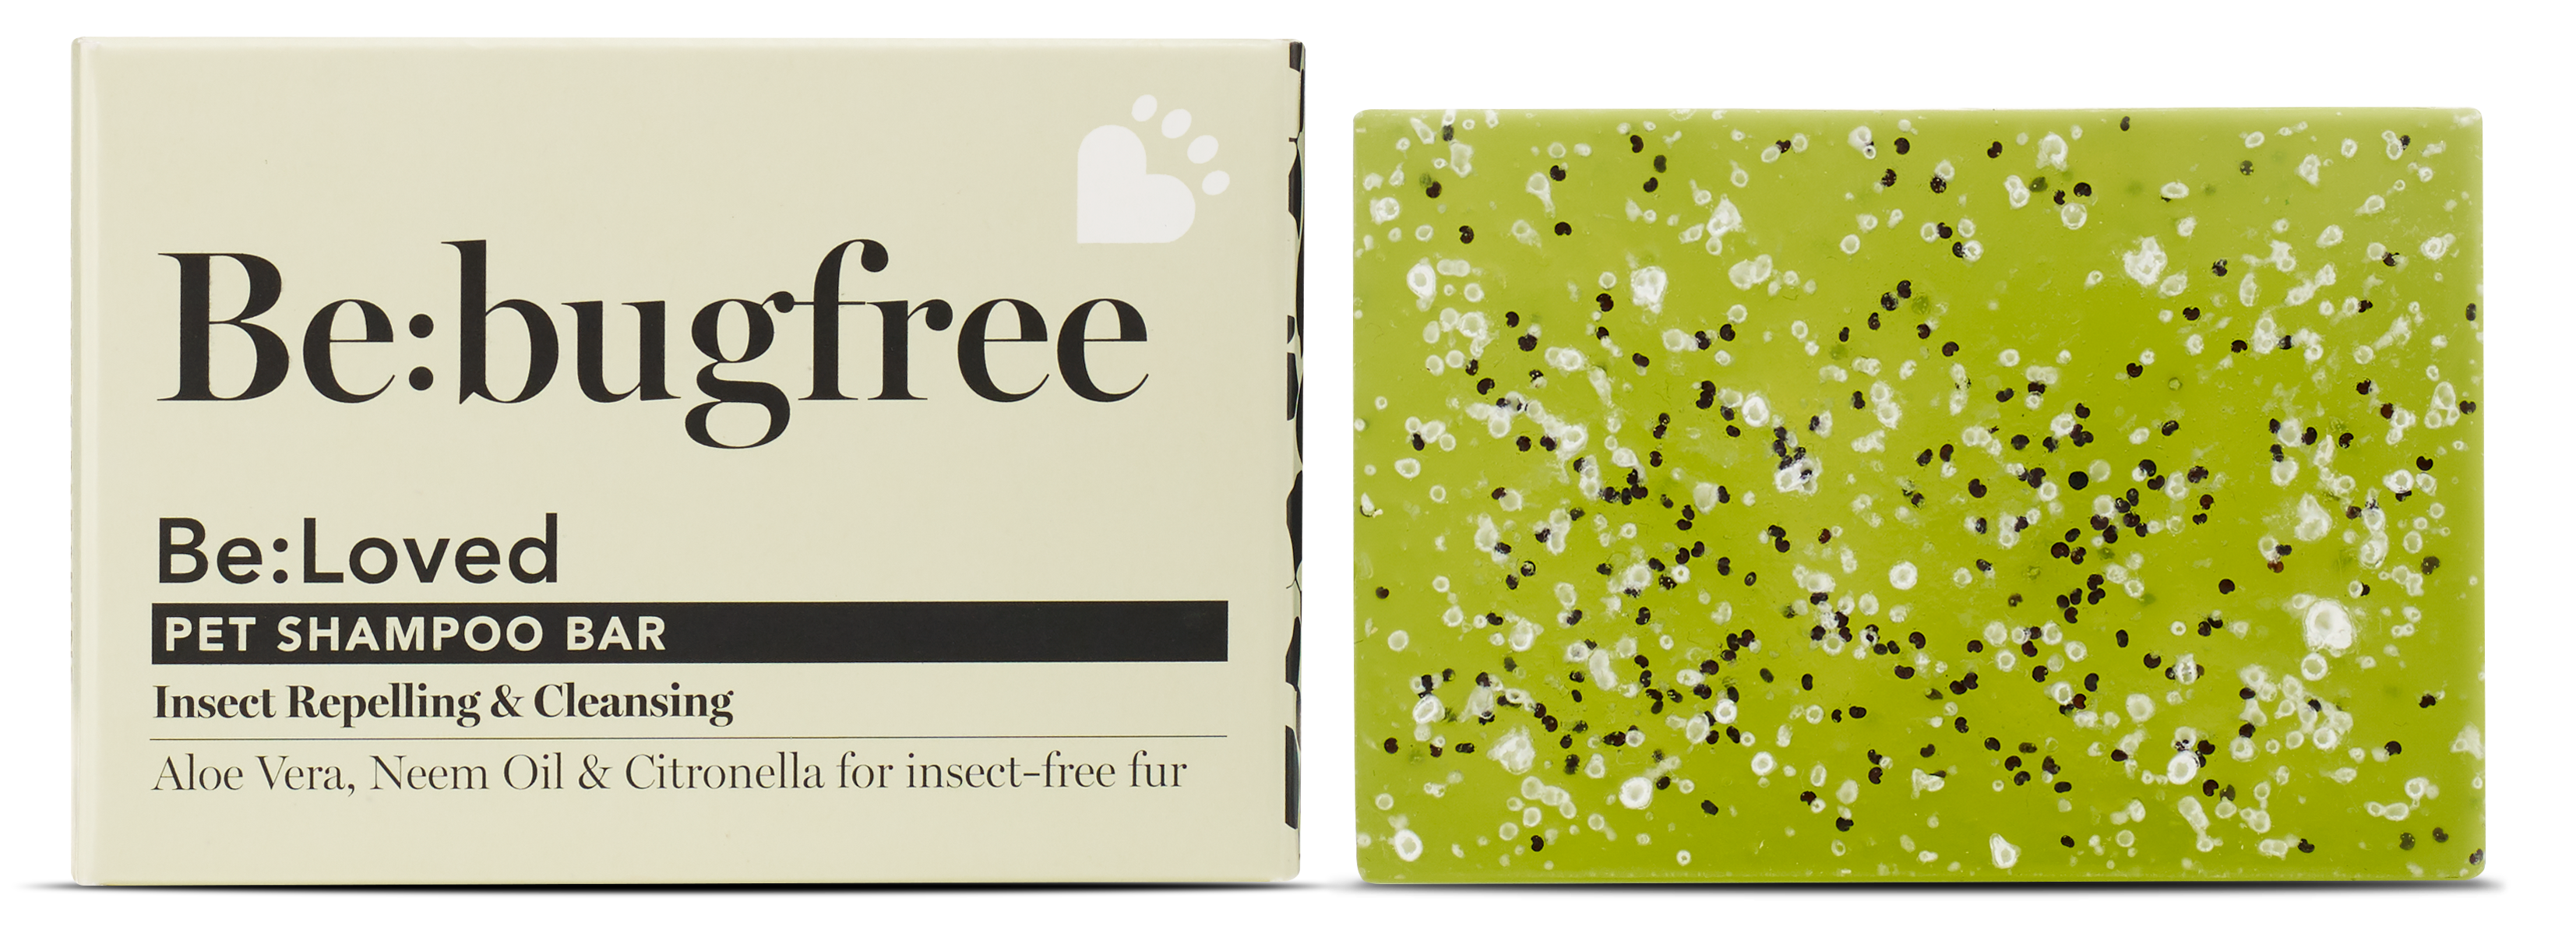 Be:bugfree pet shampoo bar product and packaging.